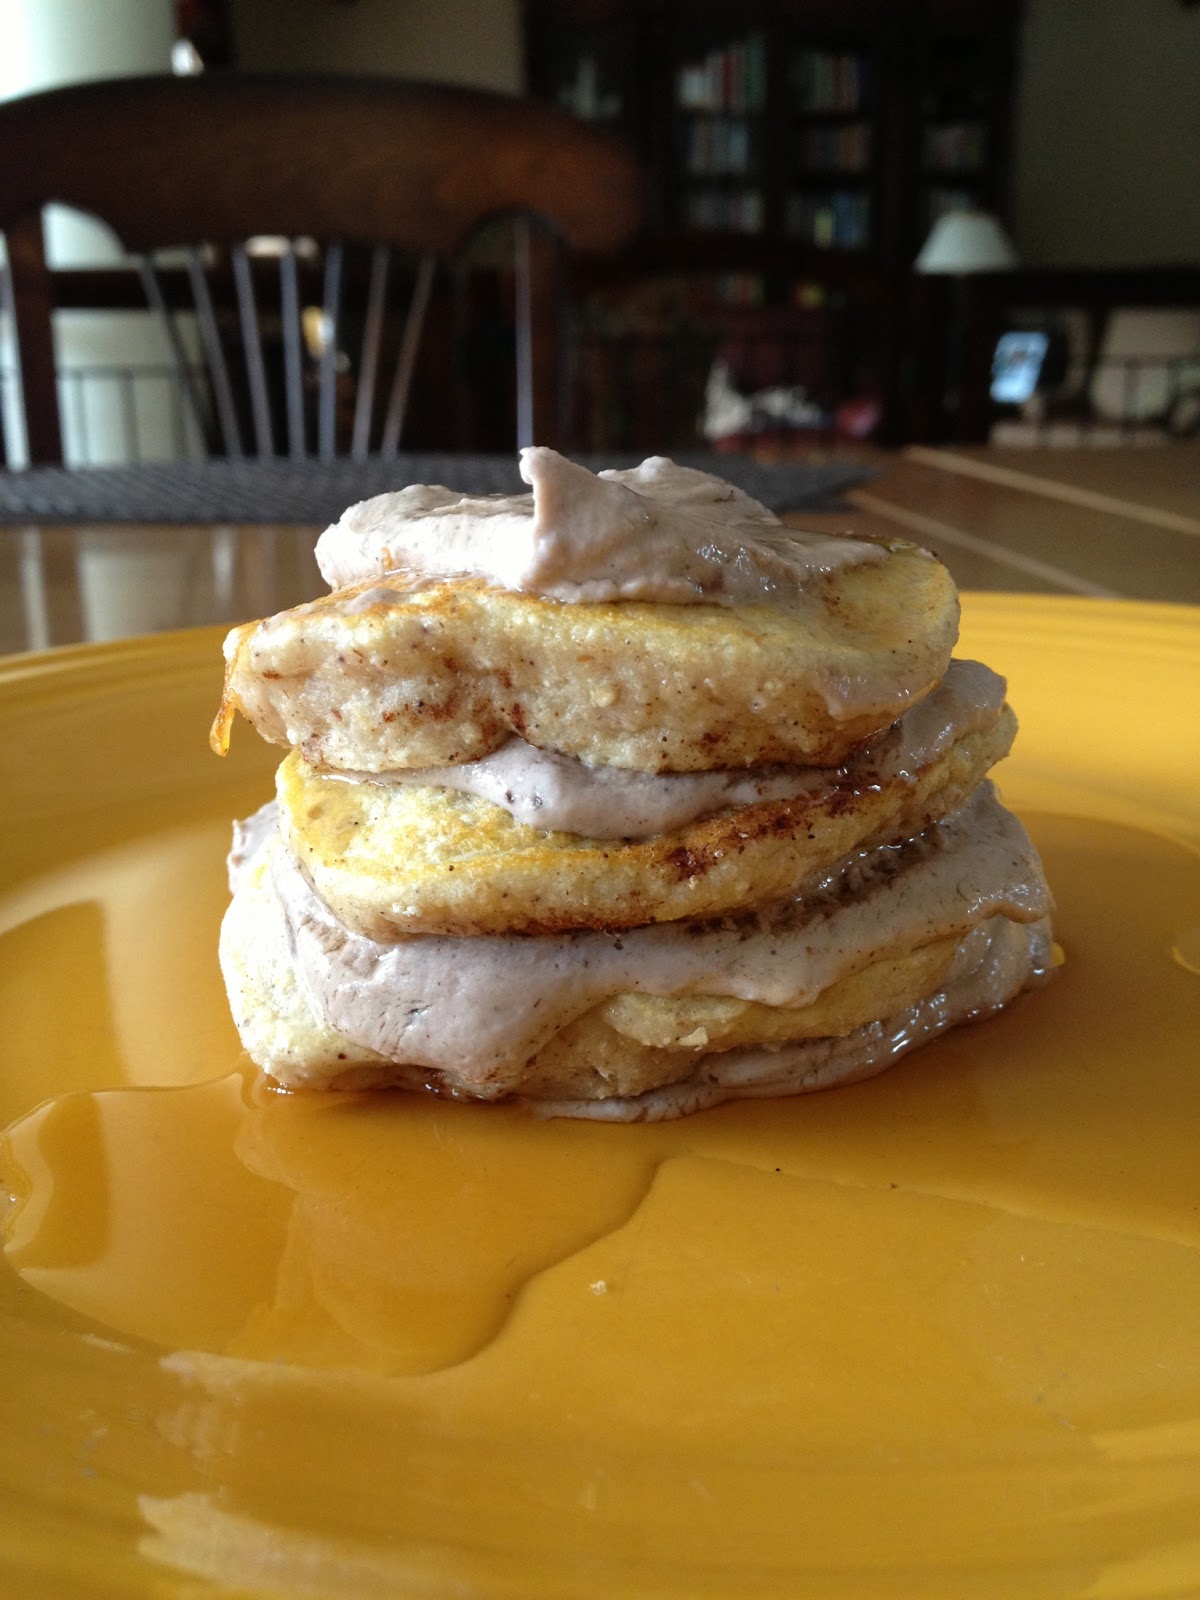 Pretty Little Feast: Vanilla Pancakes with Chocolate Cake Batter Filling